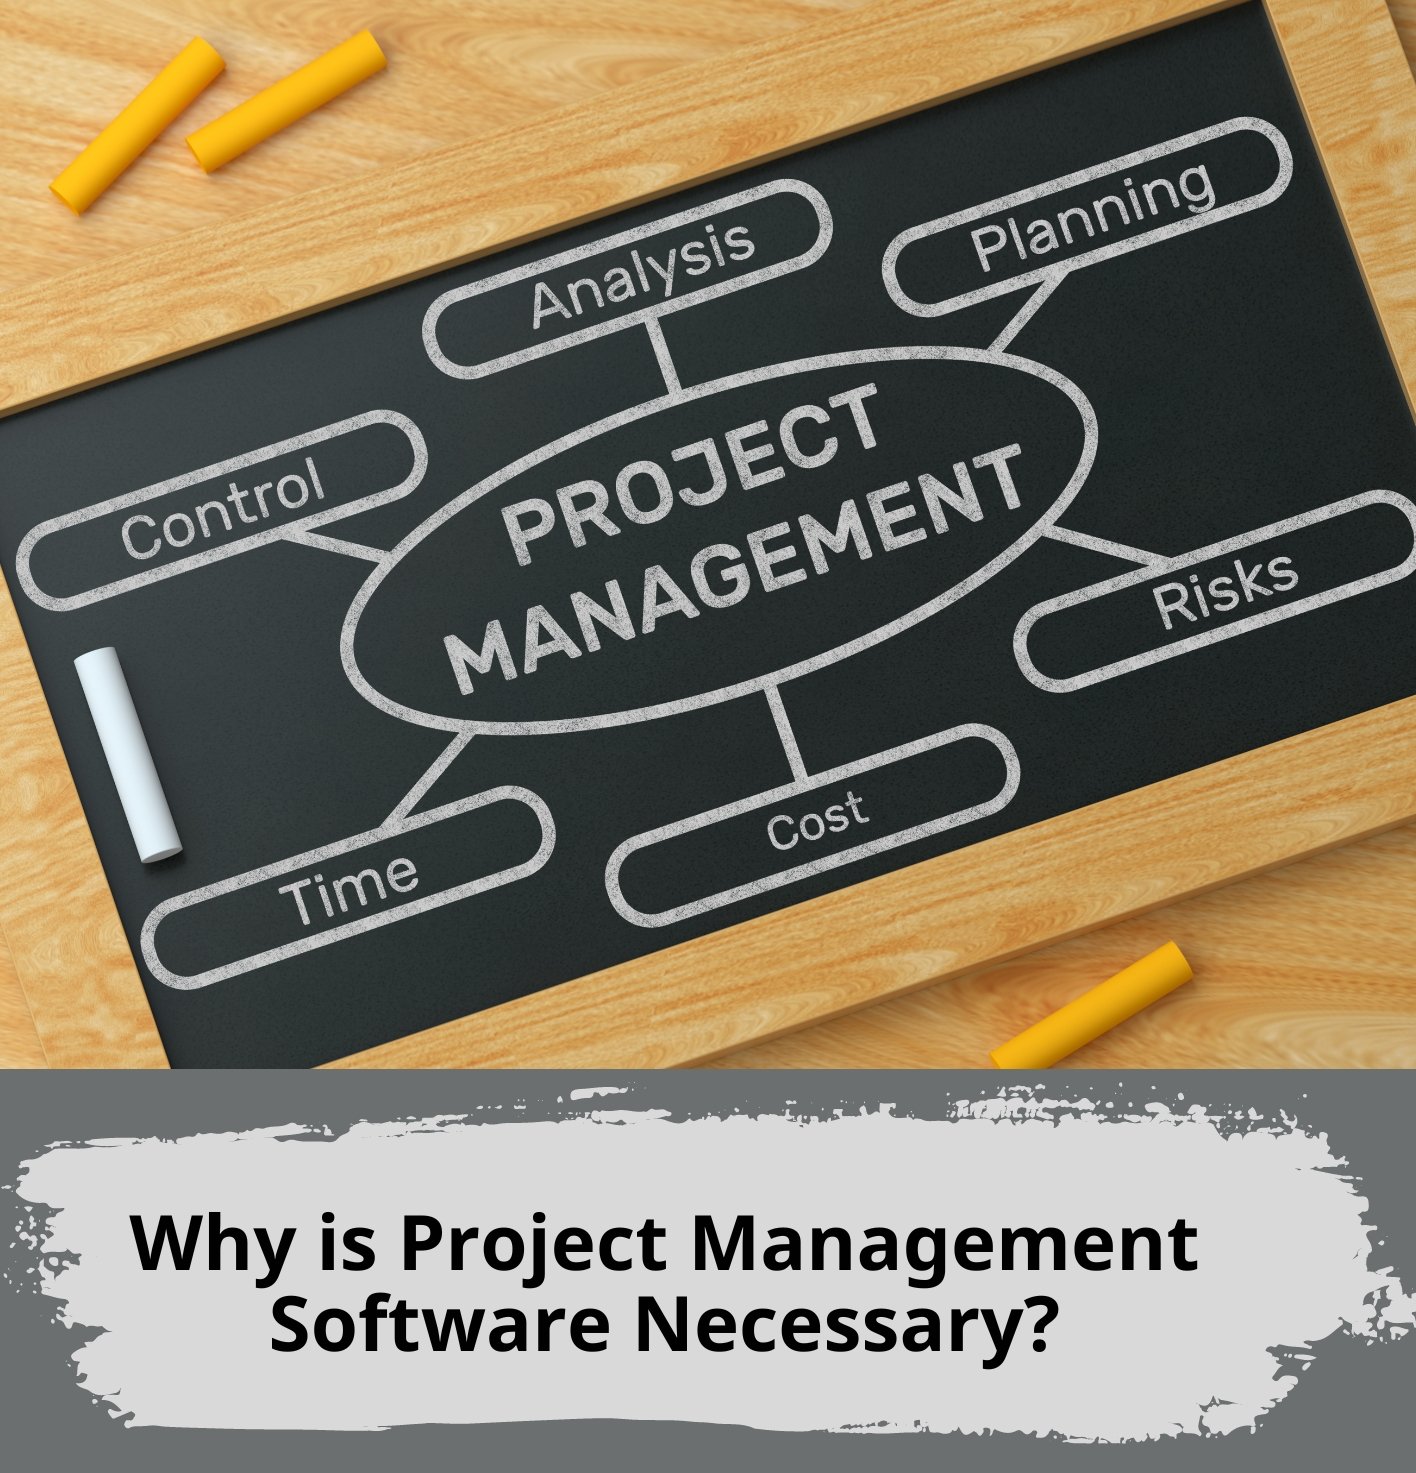 Why is Project Management Software Necessary?